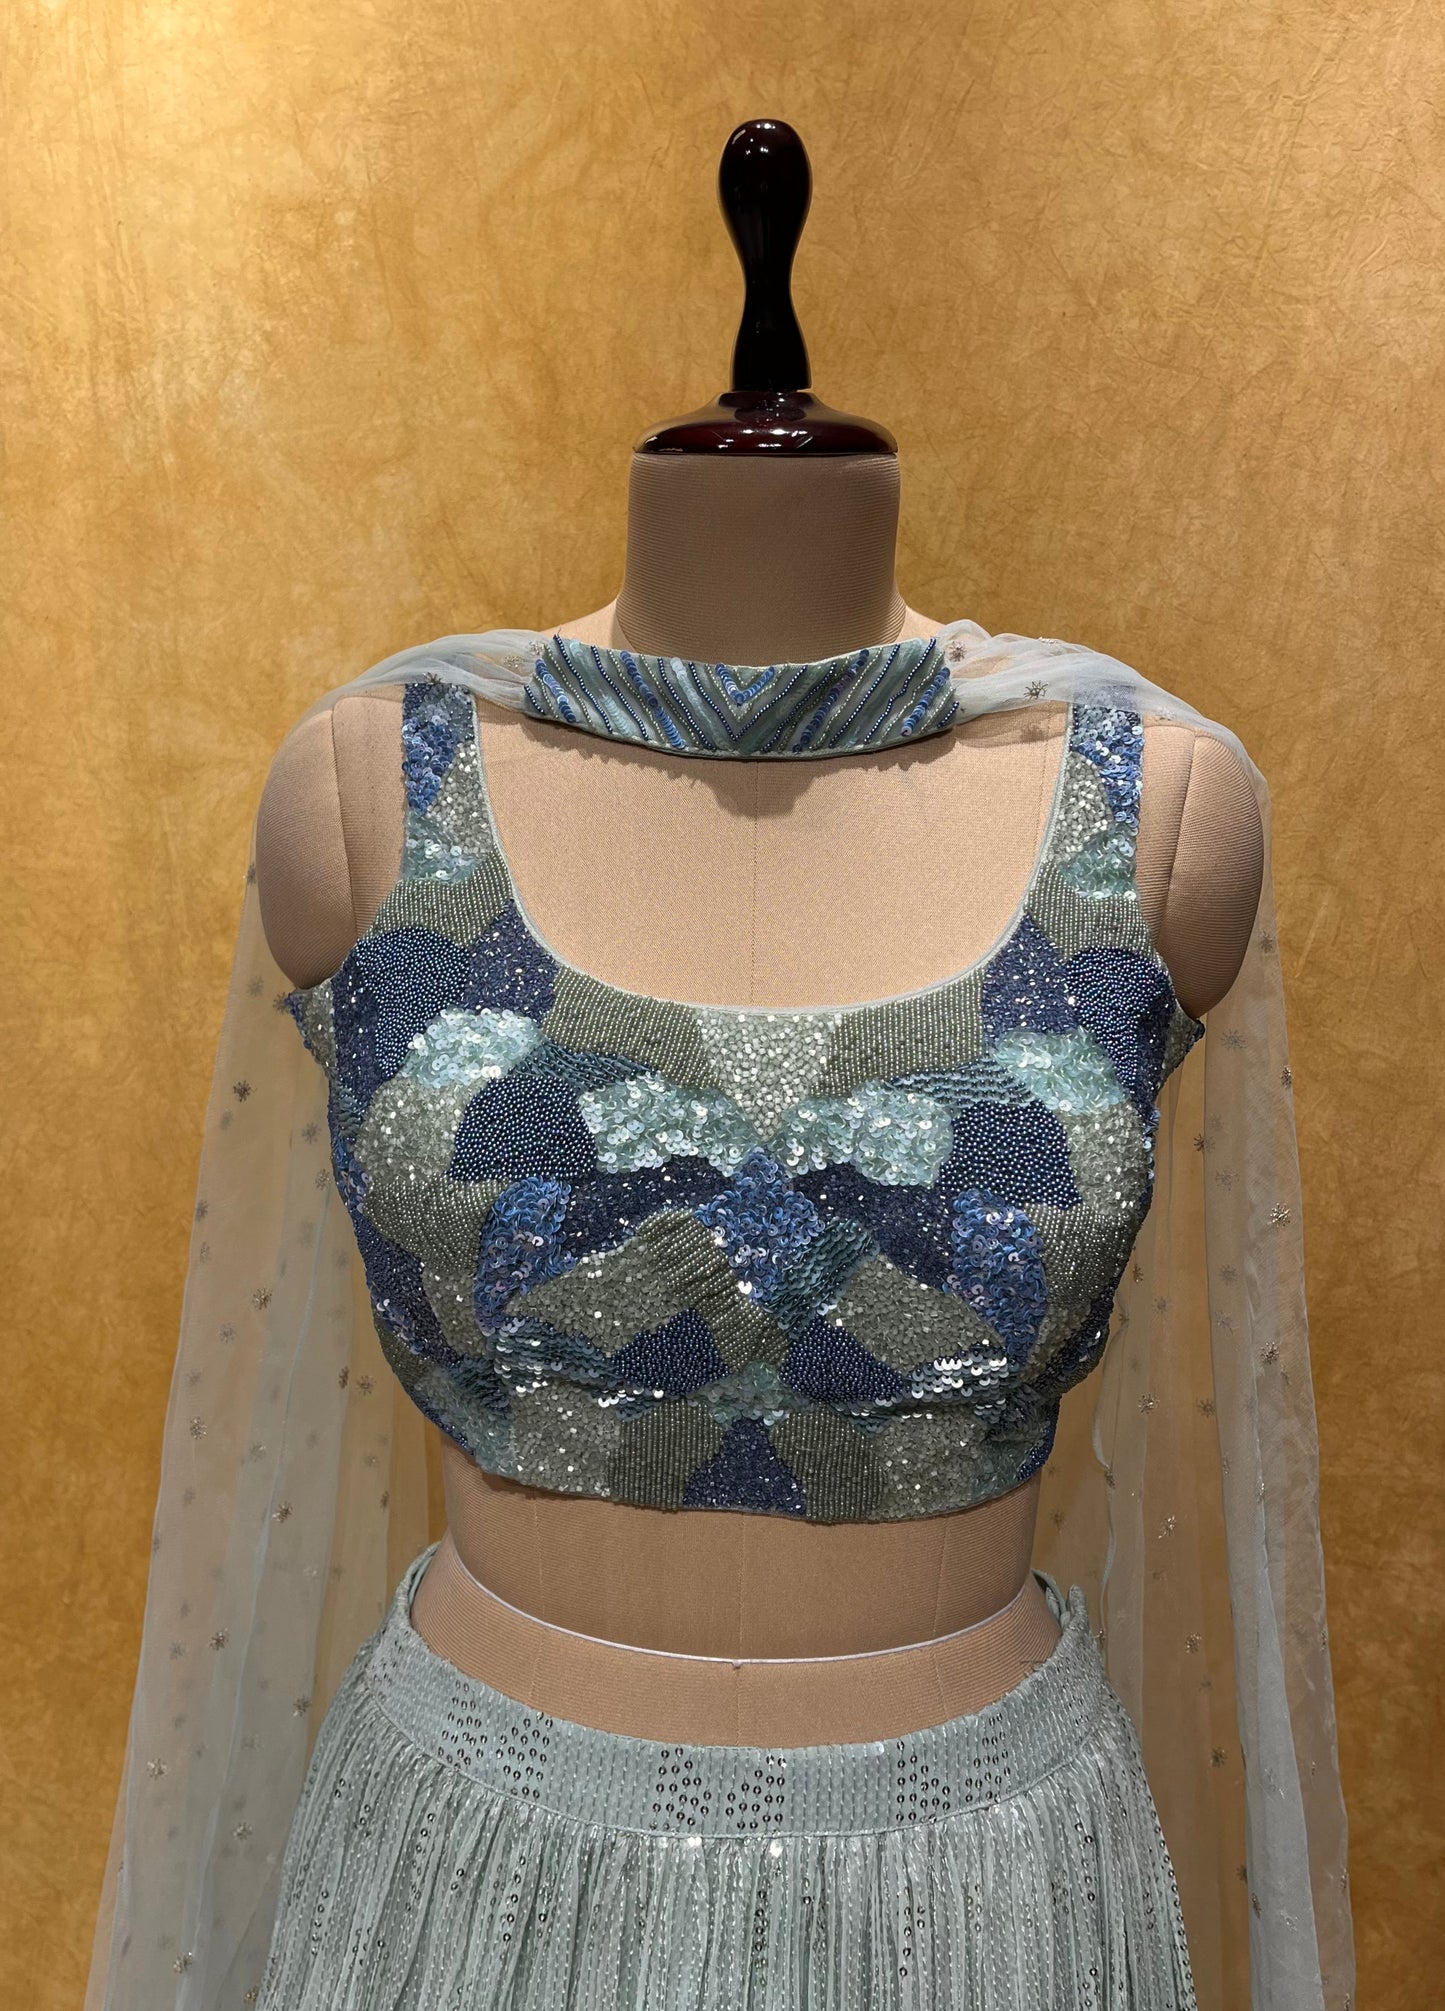 (DELIVERY IN 25-30 DAYS) BRIDESMAIDS READYMADE BLUE SHADED SEQUINS LEHENGA WITH CROP TOP BLOUSE EMBELLISHED WITH SEQUINS, BEADS & CUTDANA WORK